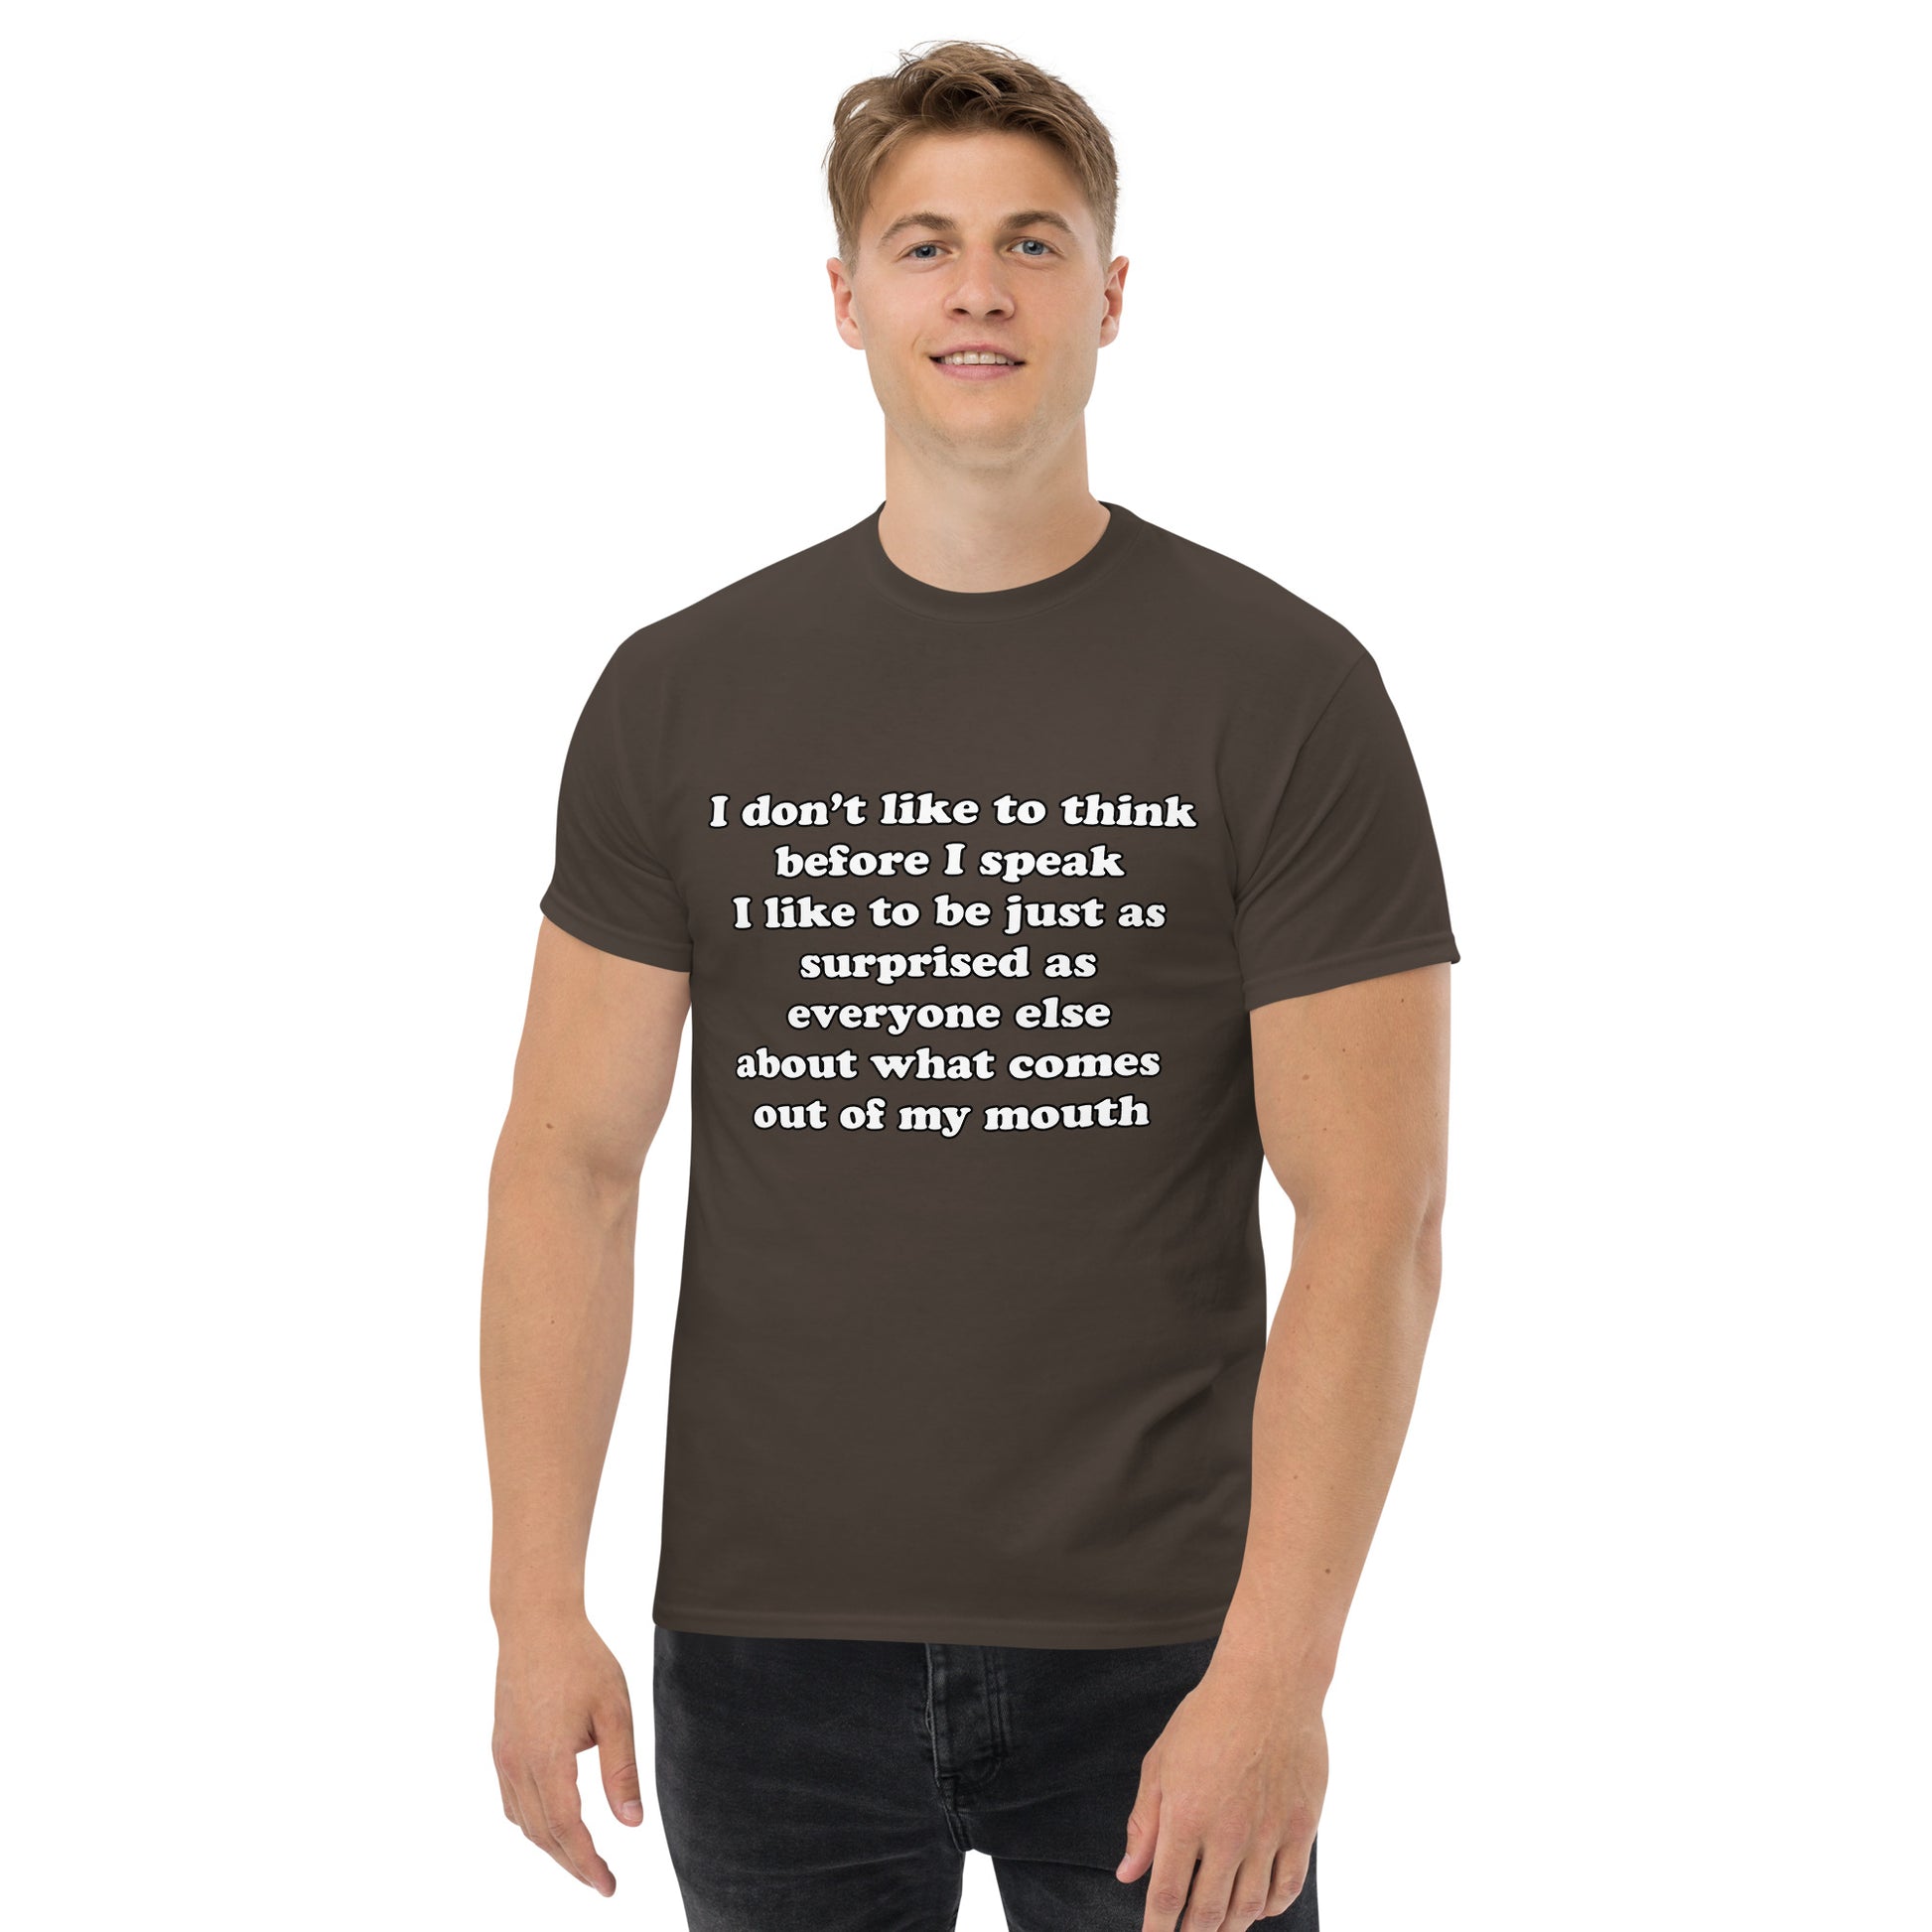 Man with dark chocolate brown t-shirt with text “I don't think before I speak Just as serprised as everyone about what comes out of my mouth"